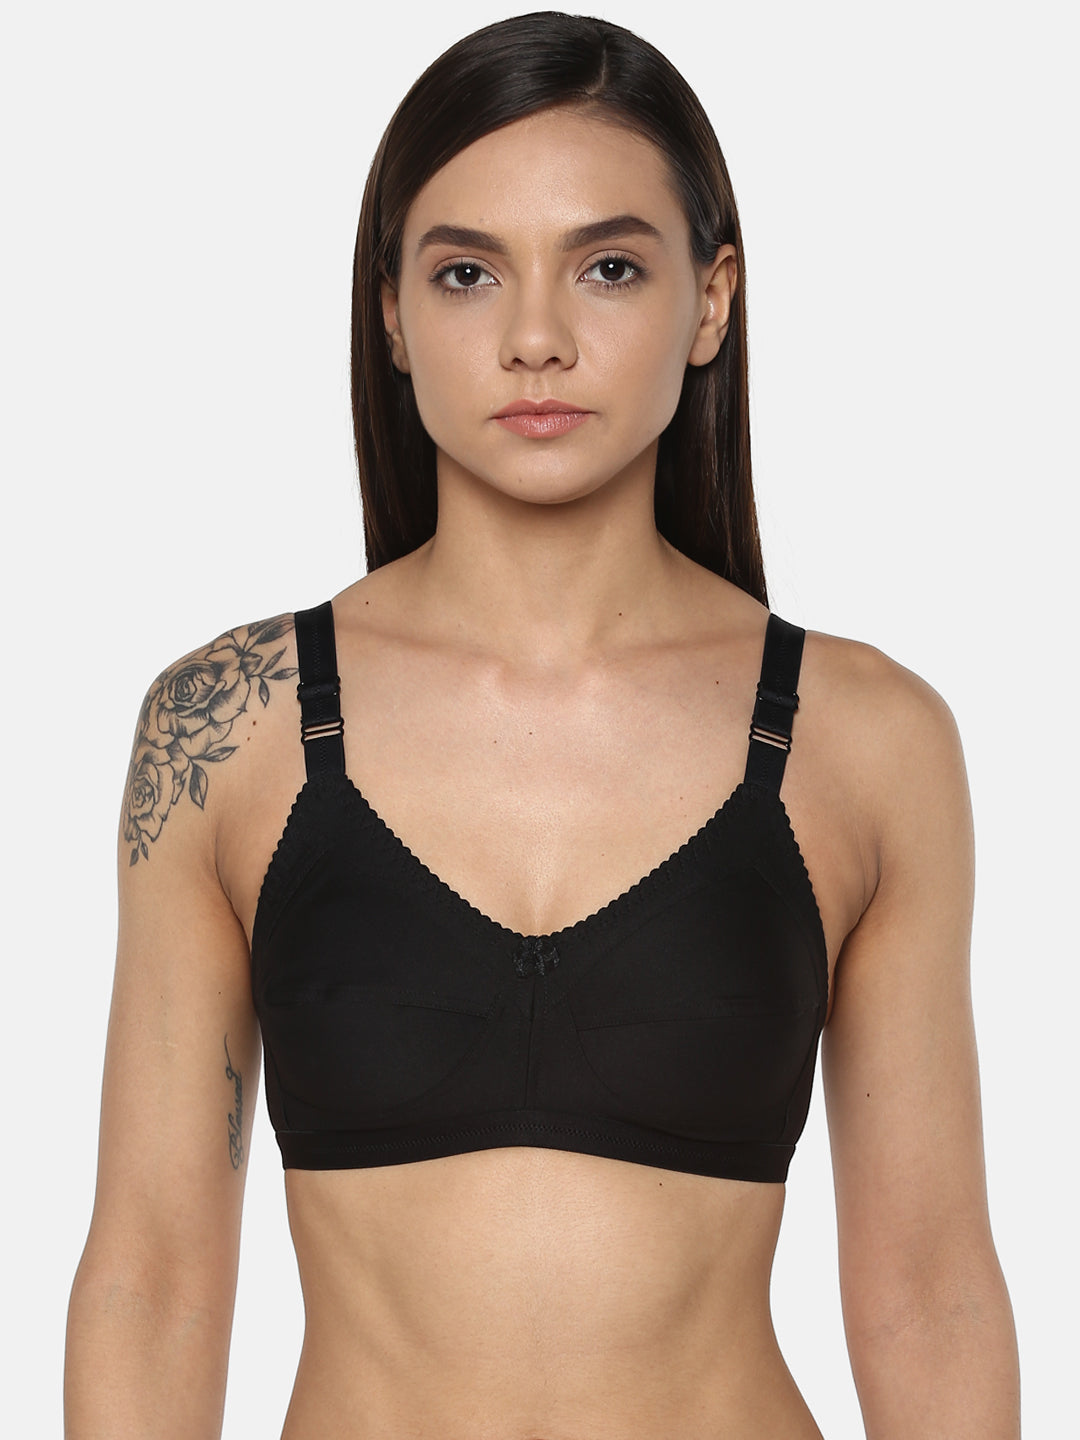 Women's Solid Non-Padded Sports Bra, SPB-4101-WH-1